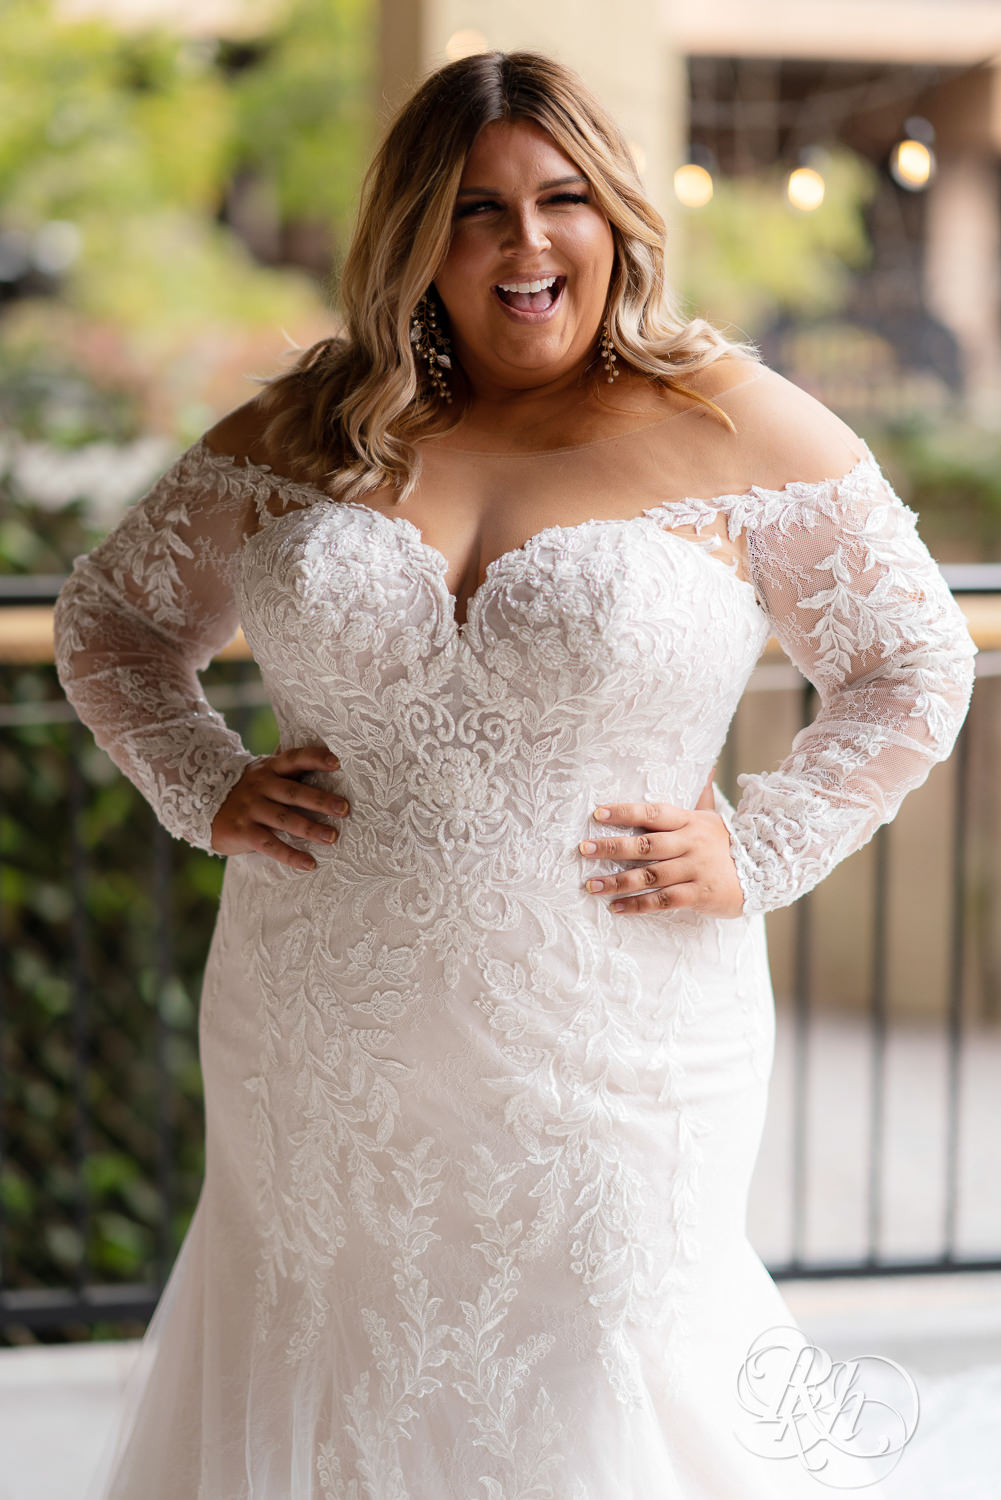 Plus size bride smiling and winking in wedding dresses in Minneapolis, Minnesota with hand on hip.